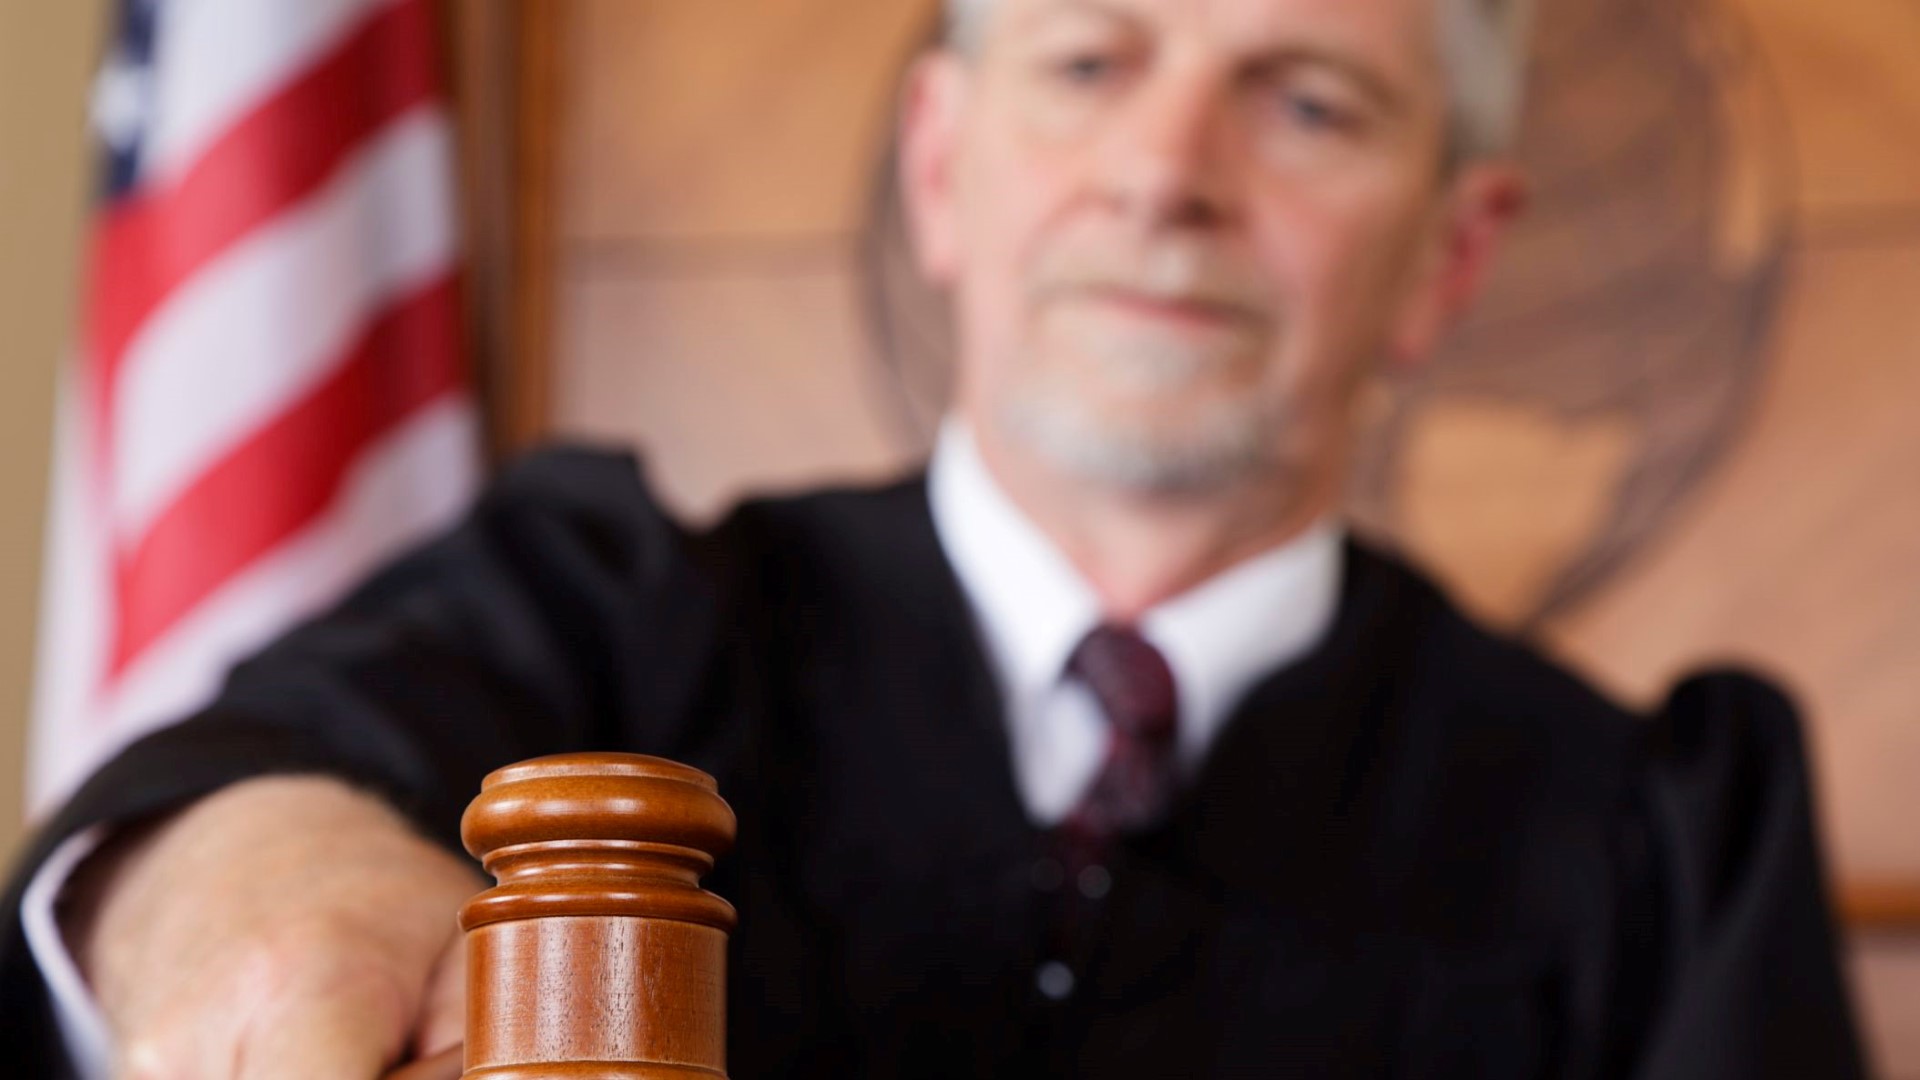 Bench Trial vs Jury Trial: What's The Difference?